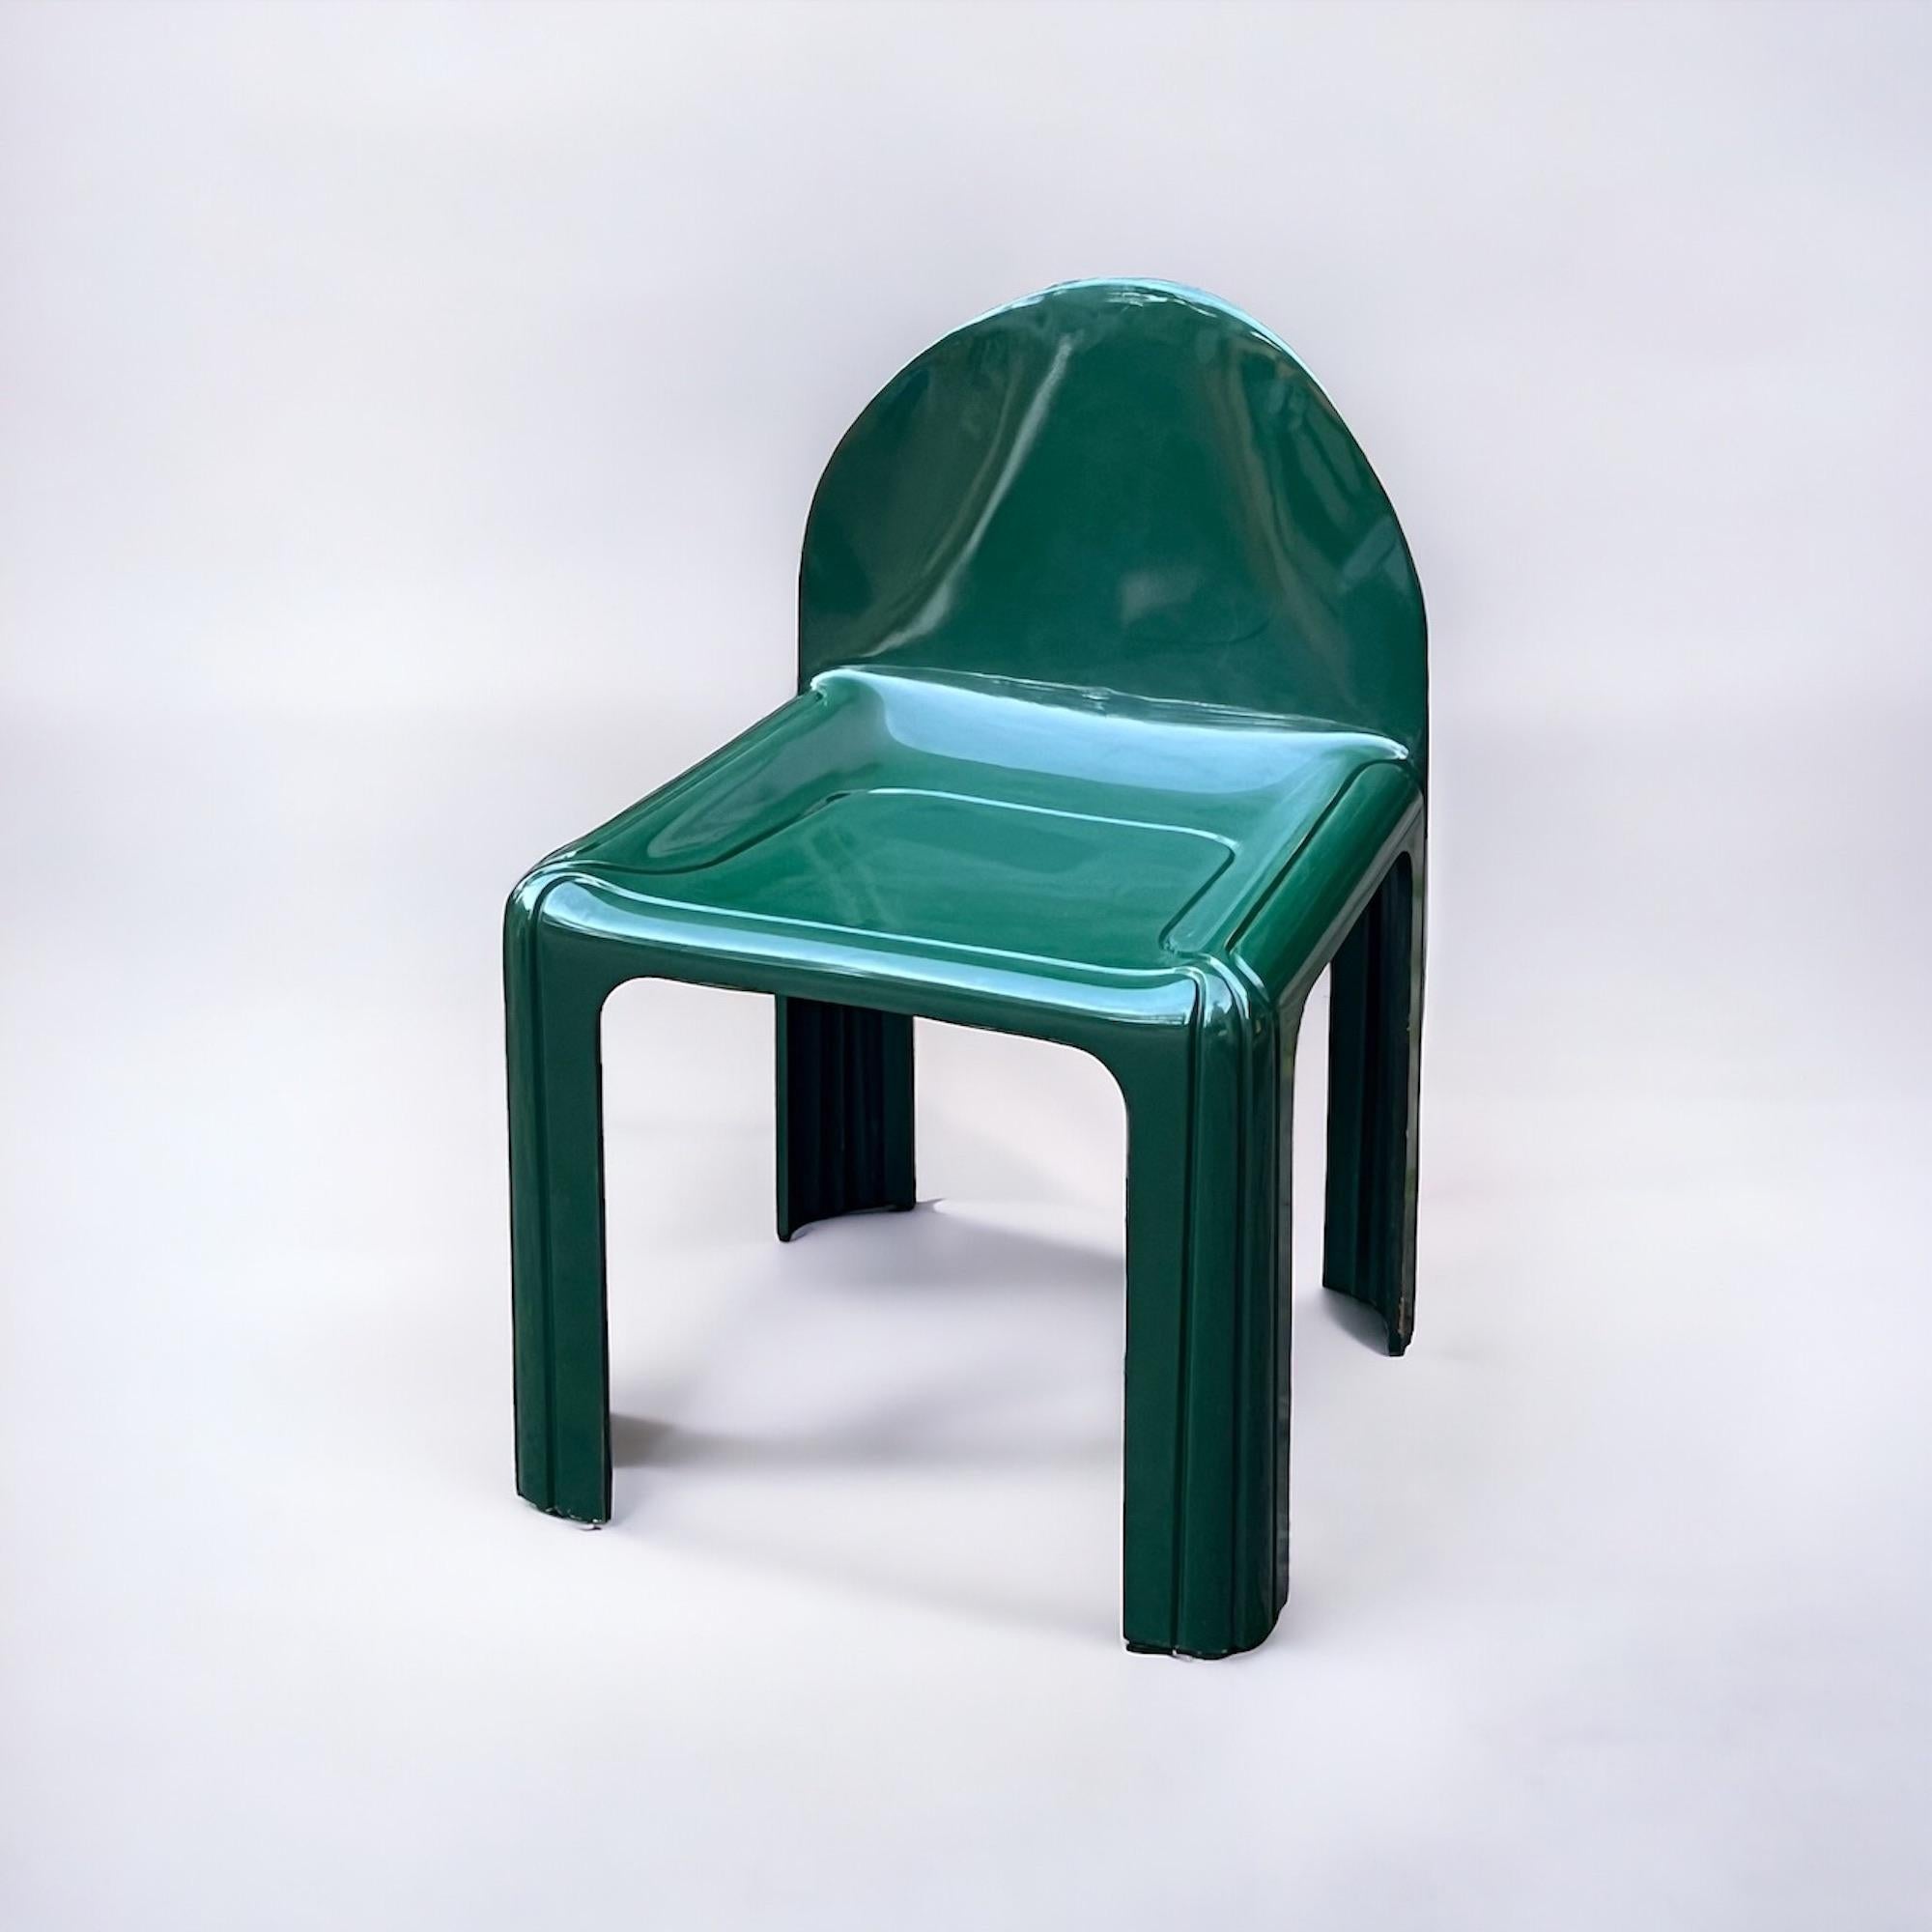 Mid-20th Century Set of 4 Green Resin Kartell Model 4854 Chairs by Gae Aulenti, 1960s